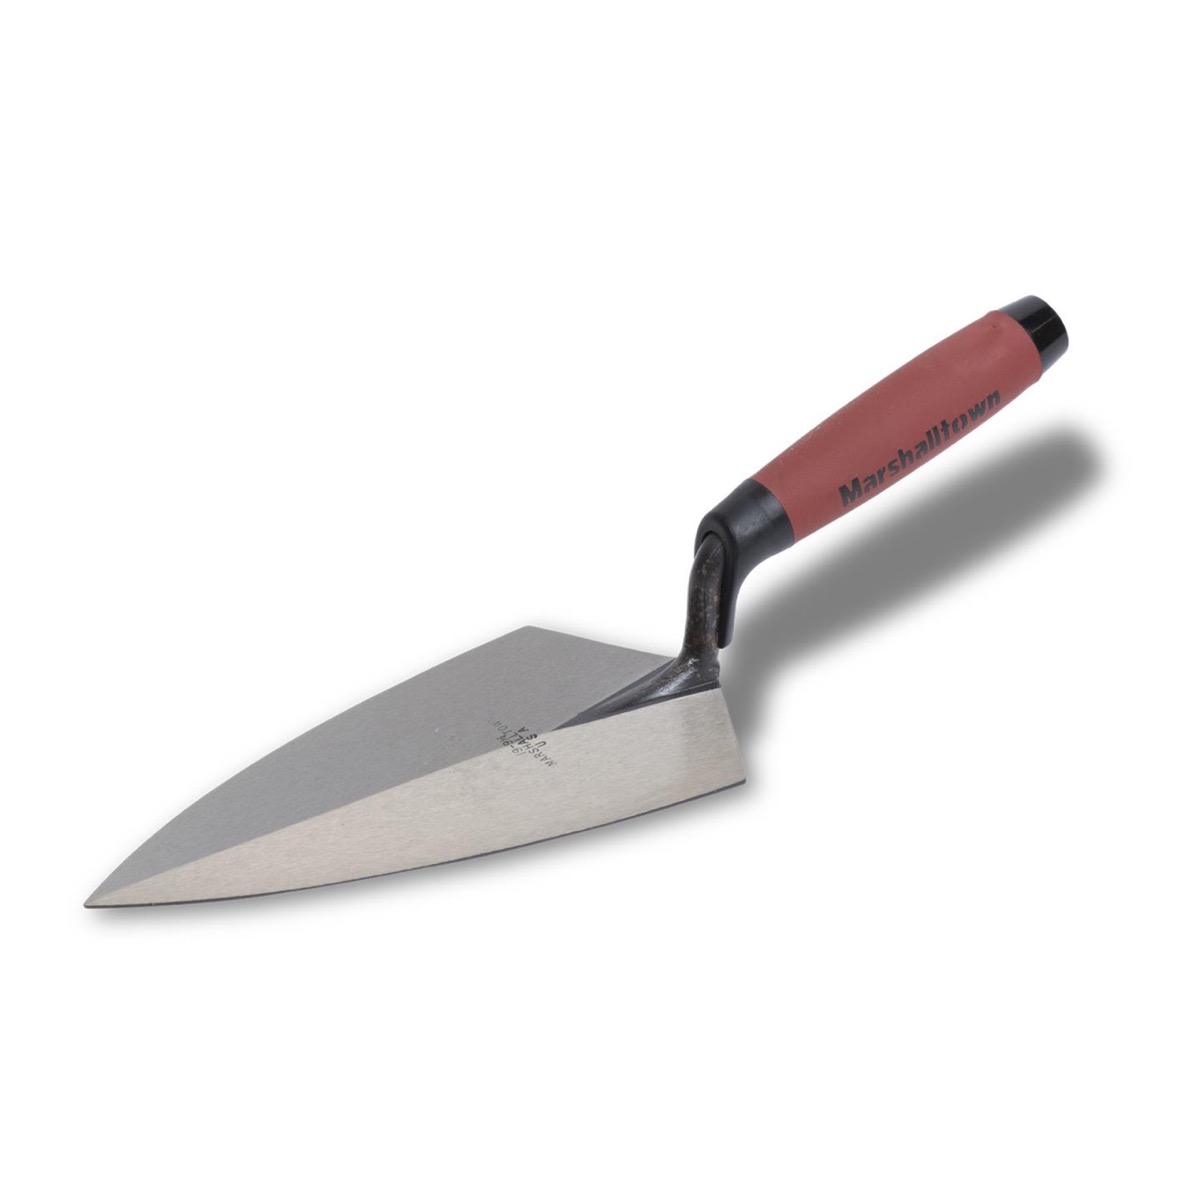 Marshalltown professional brick trowels in the Philadelphia style with a durasoft grip handles for extra comfort. Available from Speedcrete, United Kingdom.